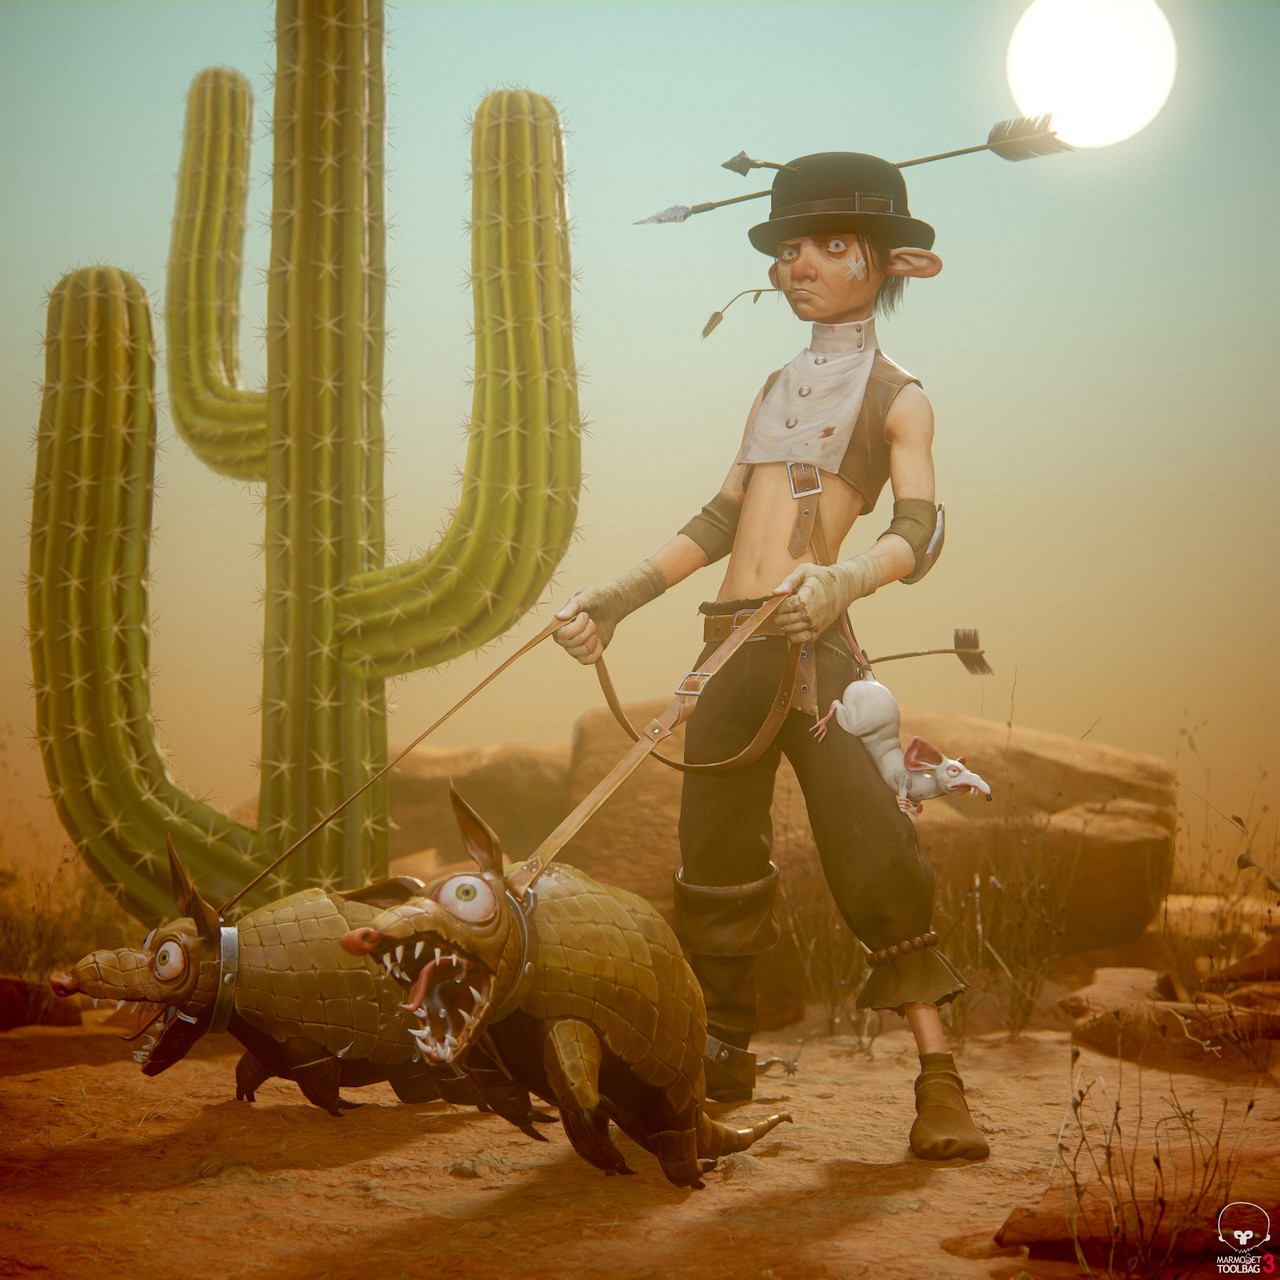 Honorable Mention, Wild West: Game Character Art (real-time)